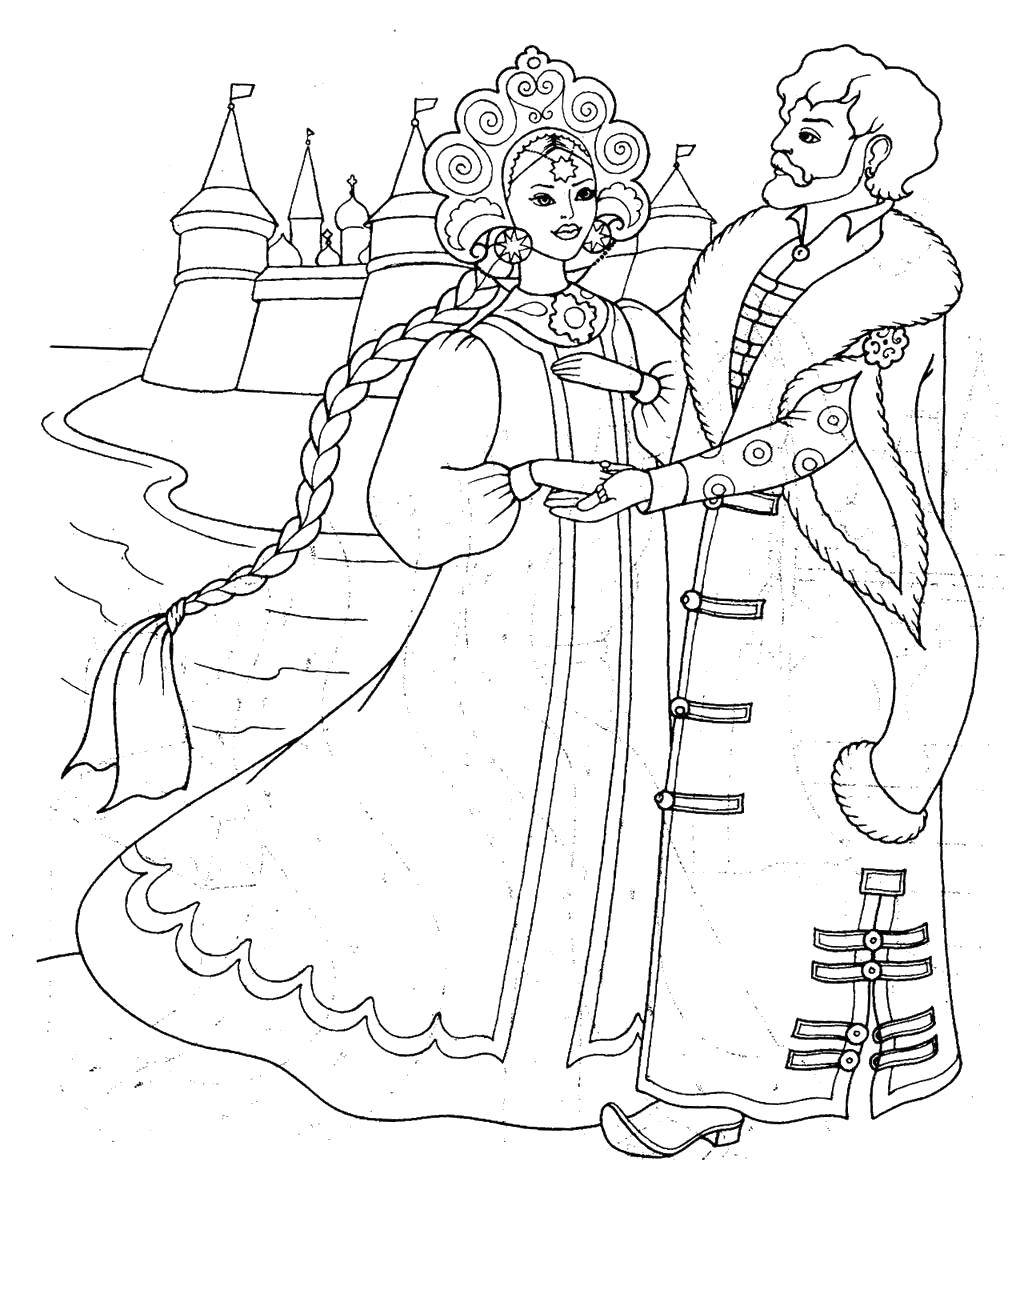 Coloring The tale of Tsar Saltan. Category the tale of Tsar Saltan. Tags:  The Tale Of Tsar Saltan.